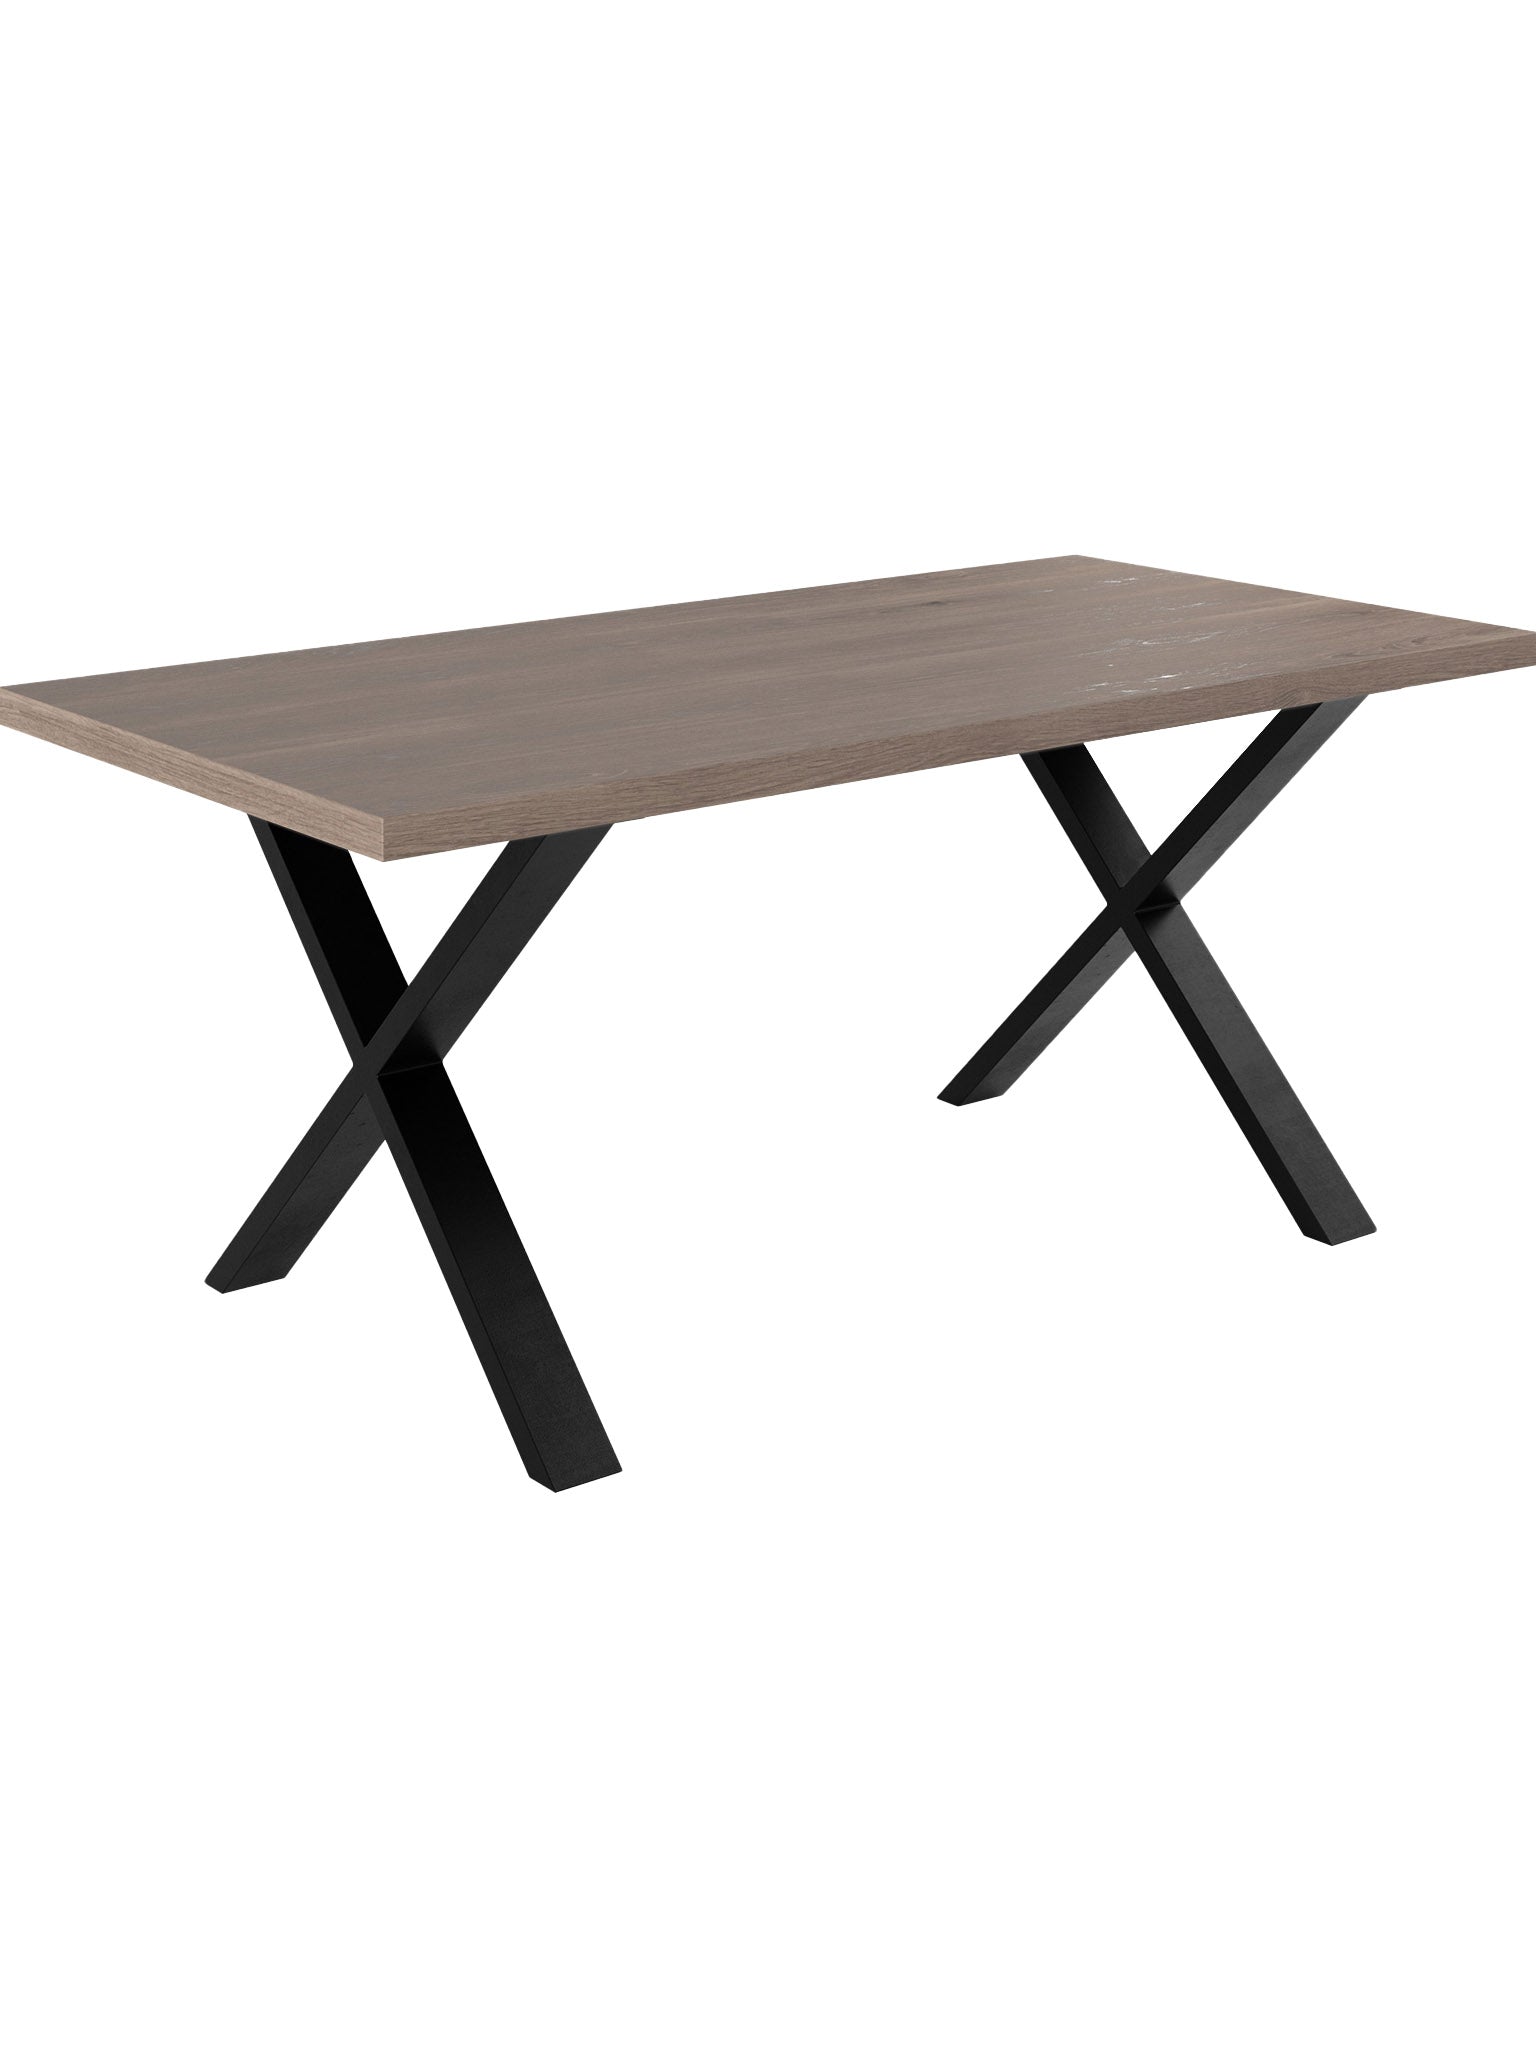 Rectangular Wooden Dining table with black metal legs